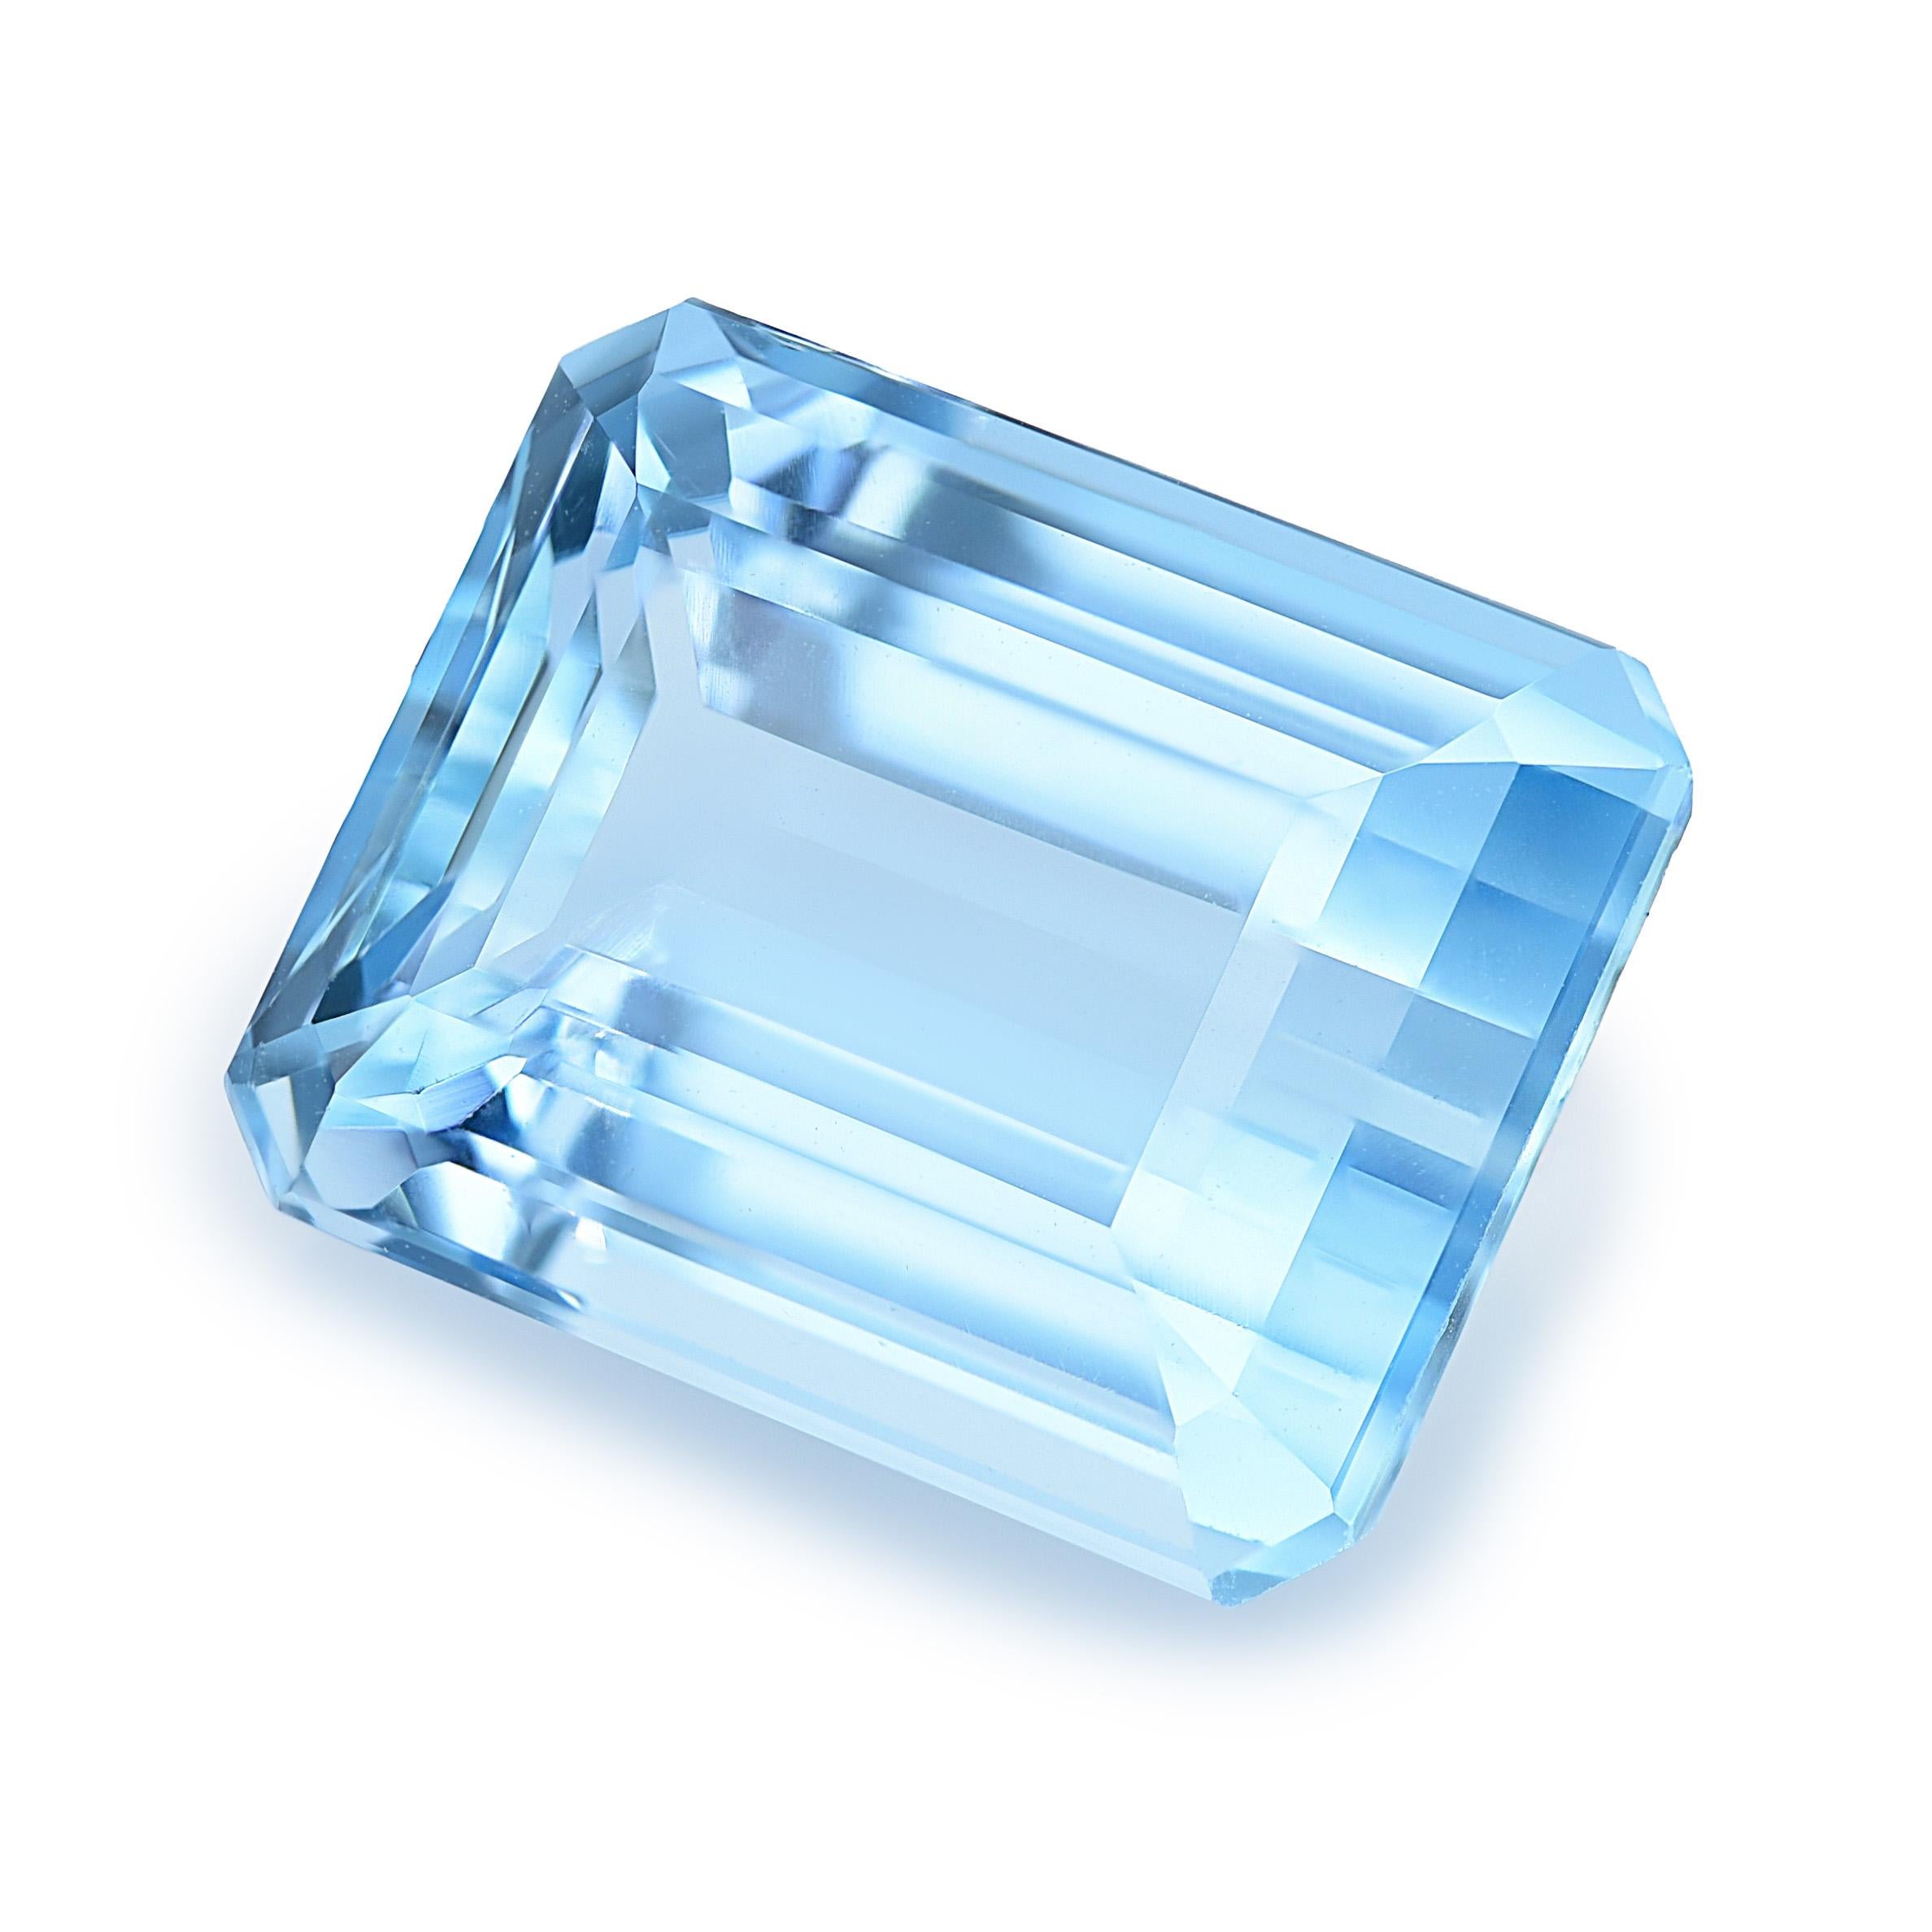 Introducing a striking 7.52 carats natural Aquamarine, featuring a cushion shape with brilliant/step cut. The gem, measuring 13 x 10.22 x 7.15 mm, showcases a serene Light Blue color that adds an elegant touch. With very eye-clean clarity, it